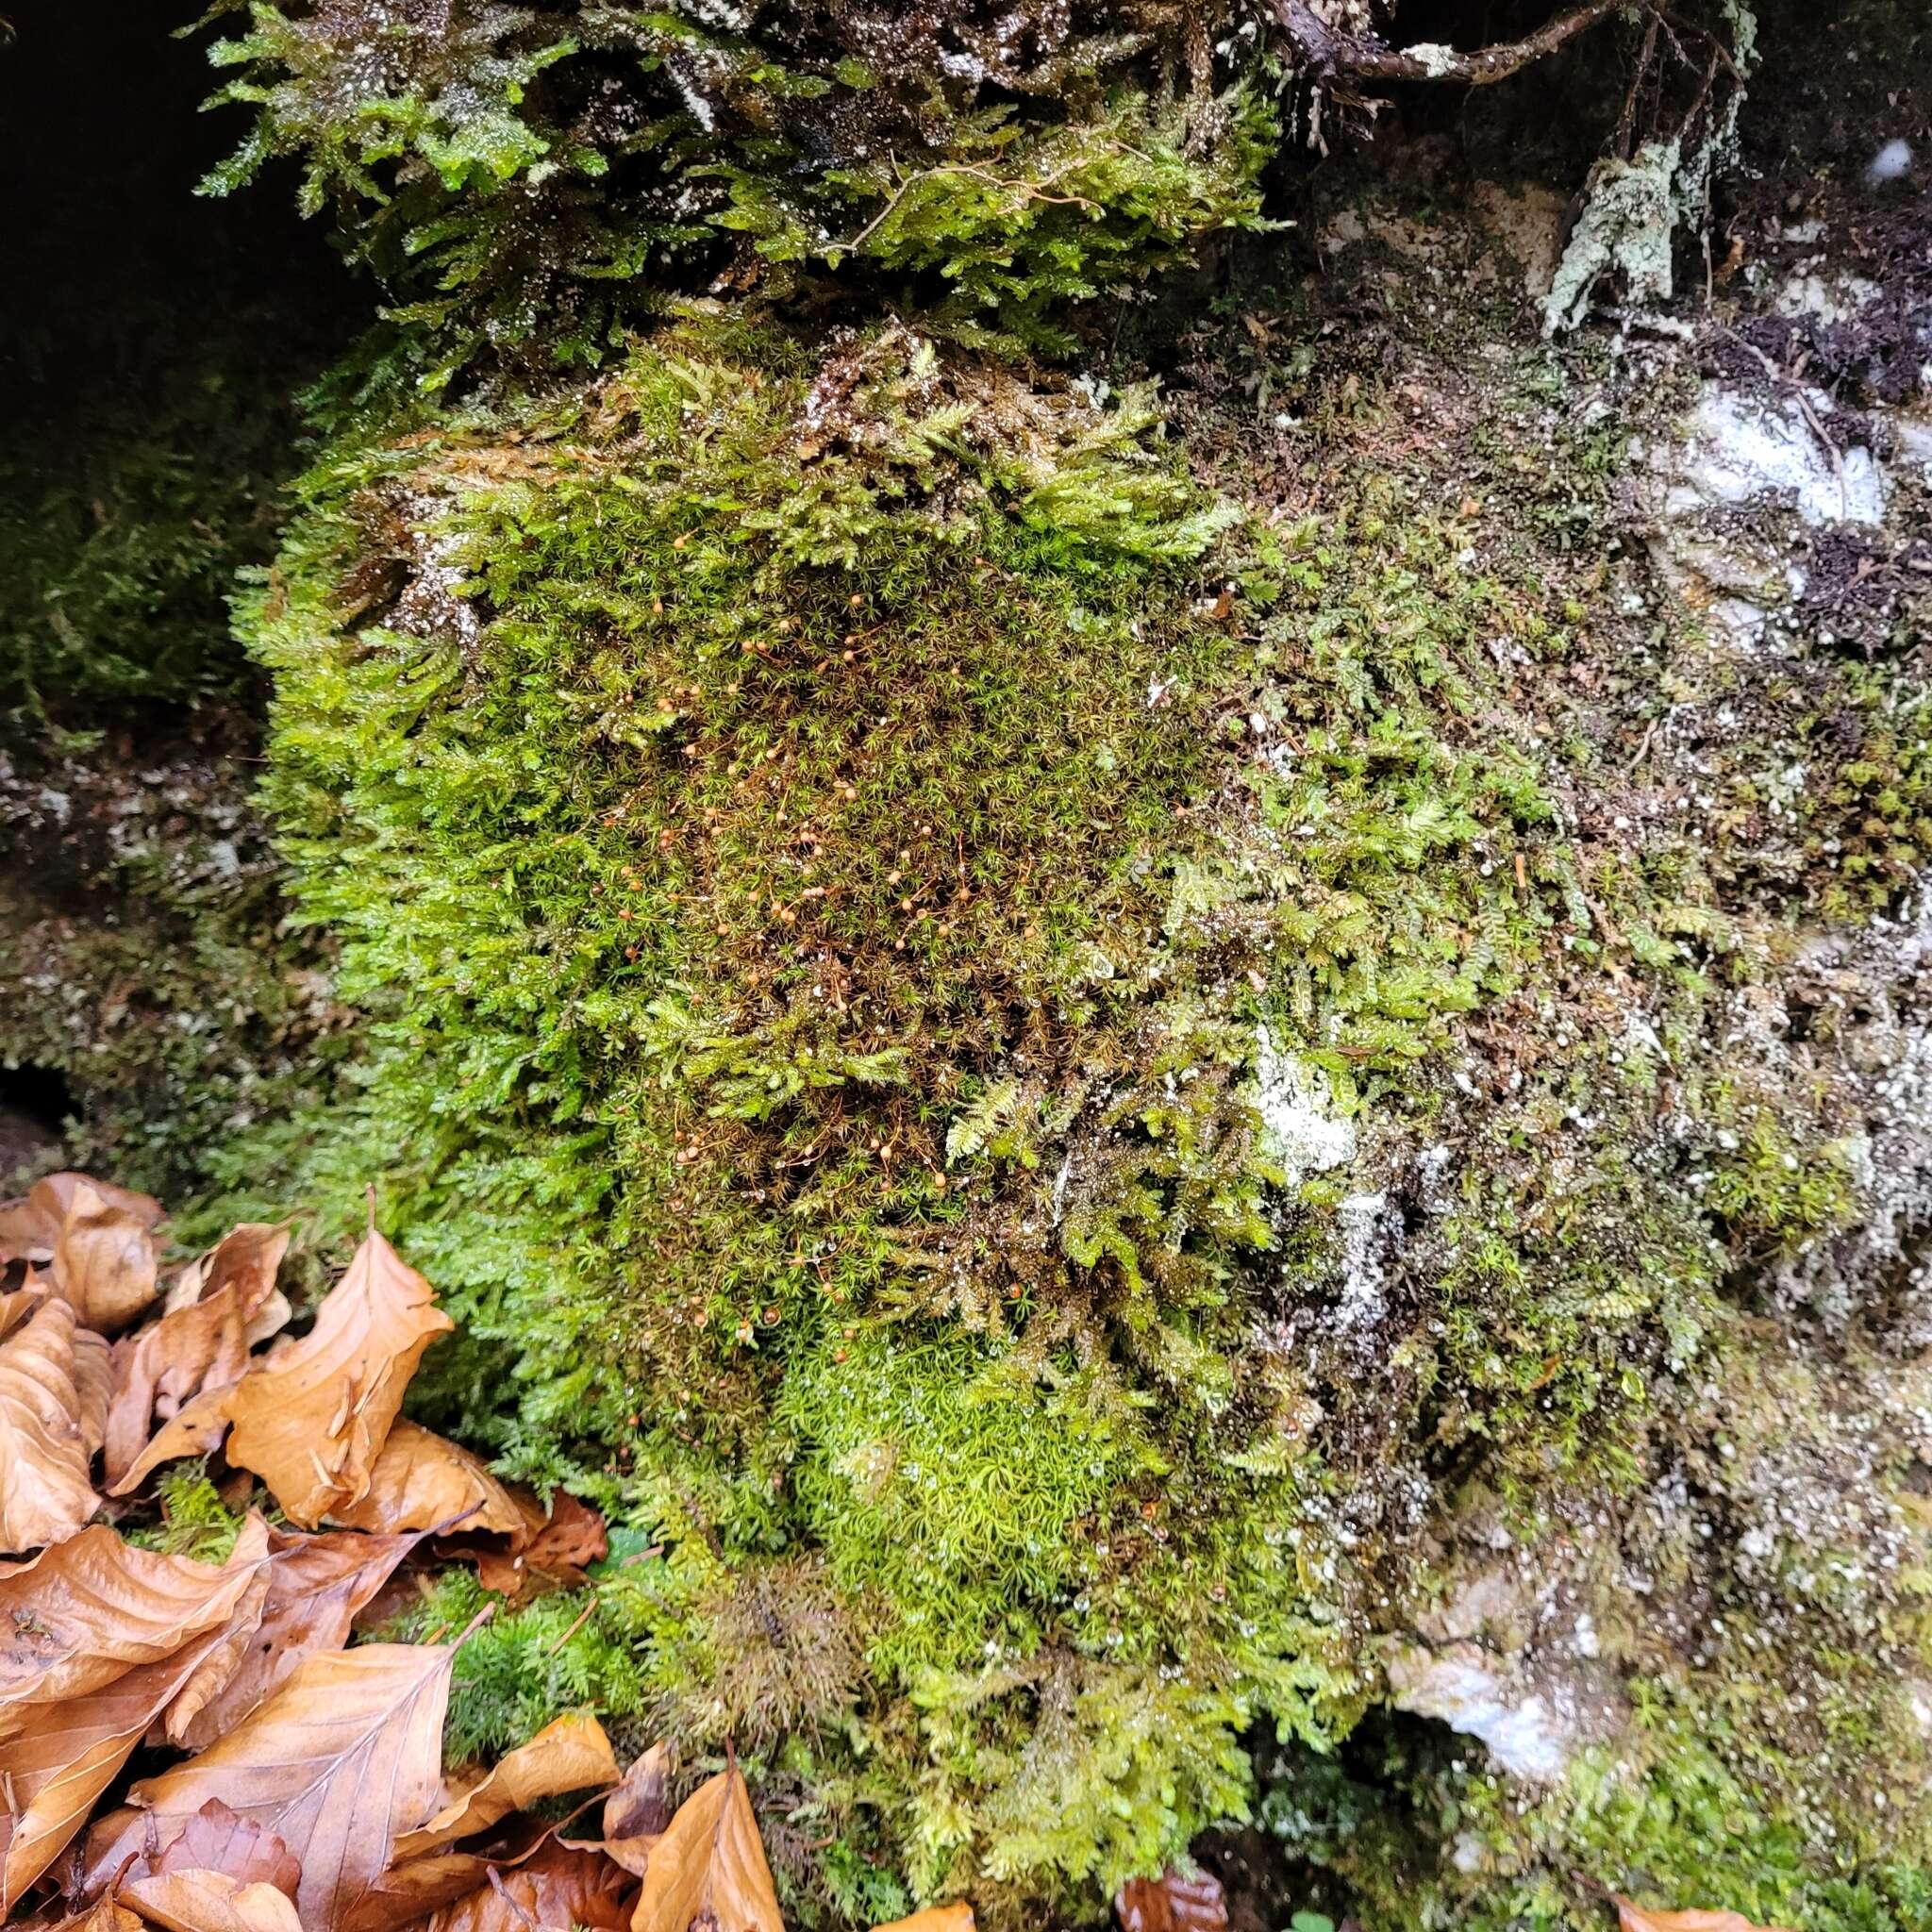 Image of Oeder's apple-moss